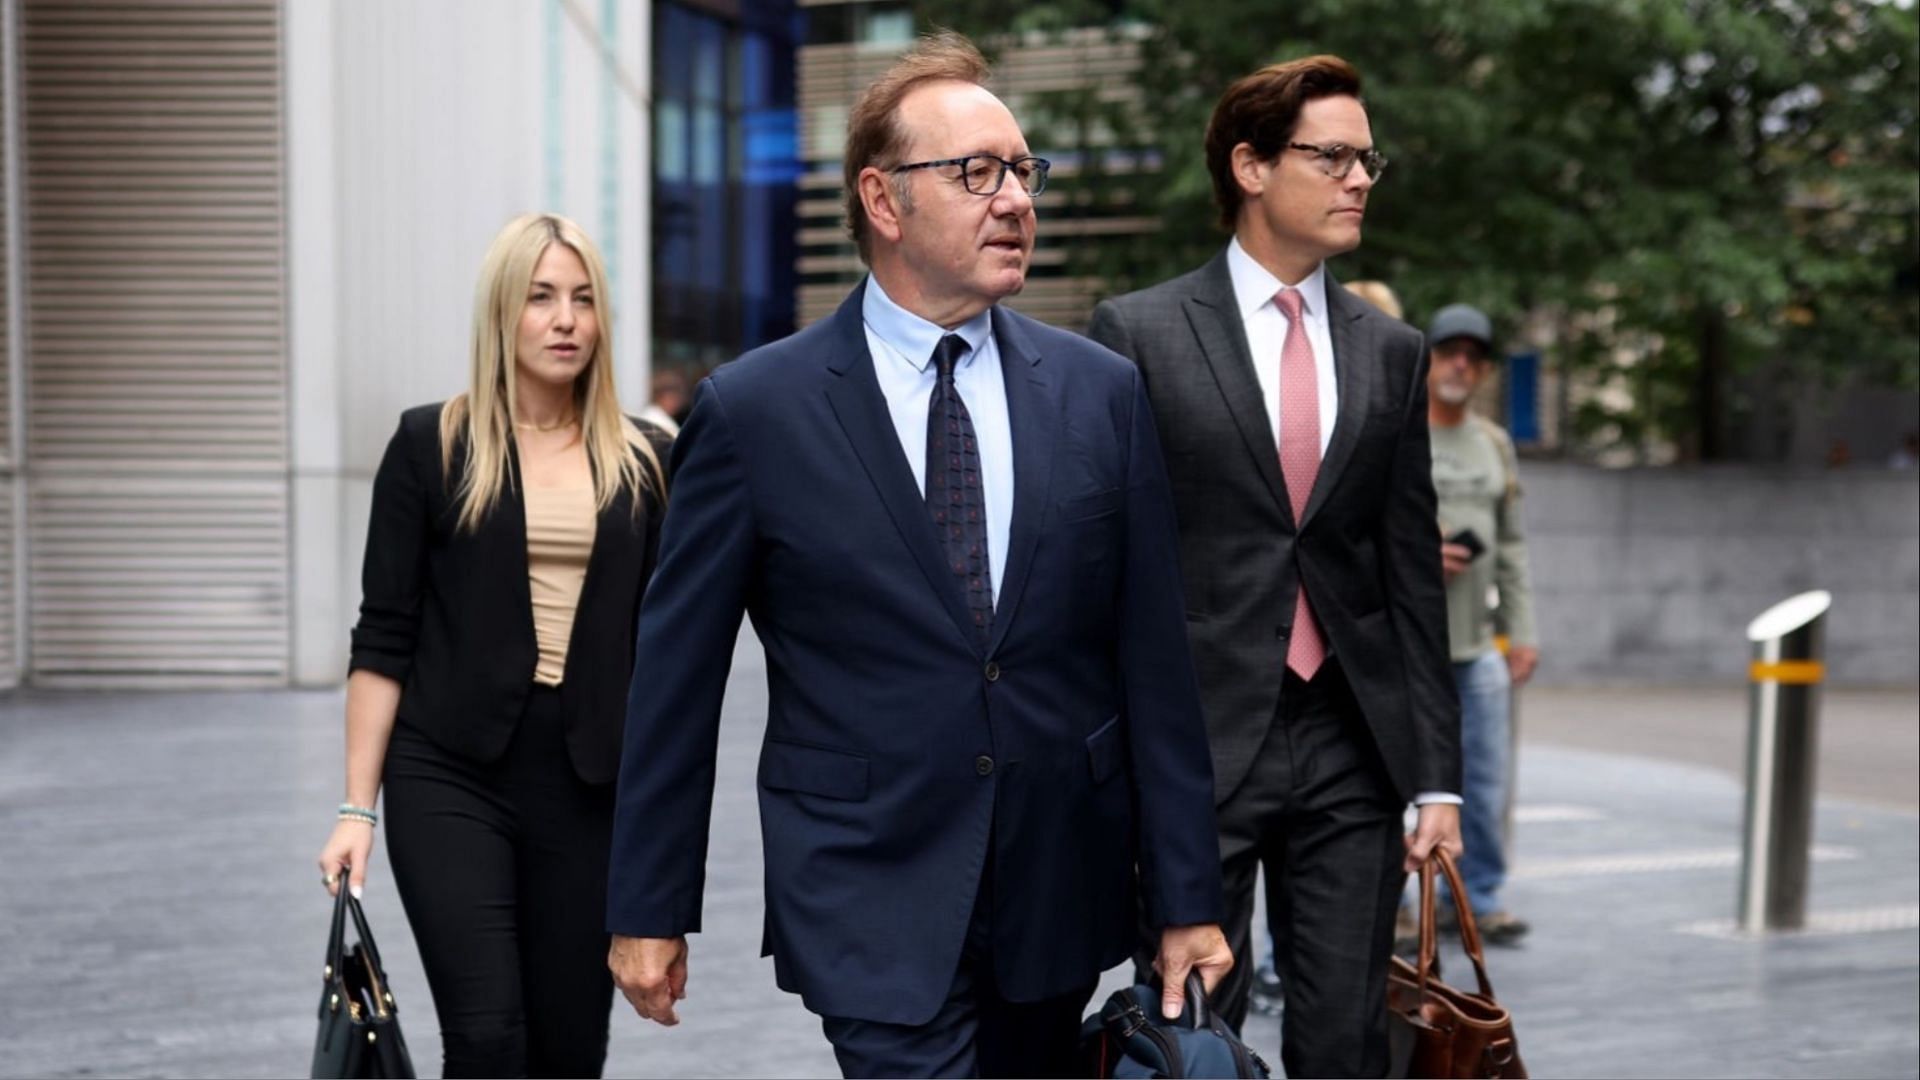 Kevin Spacey arriving at Southwark Crown Court in London for his sexual assault case. (Image via Dan Kitwood/Getty Images)